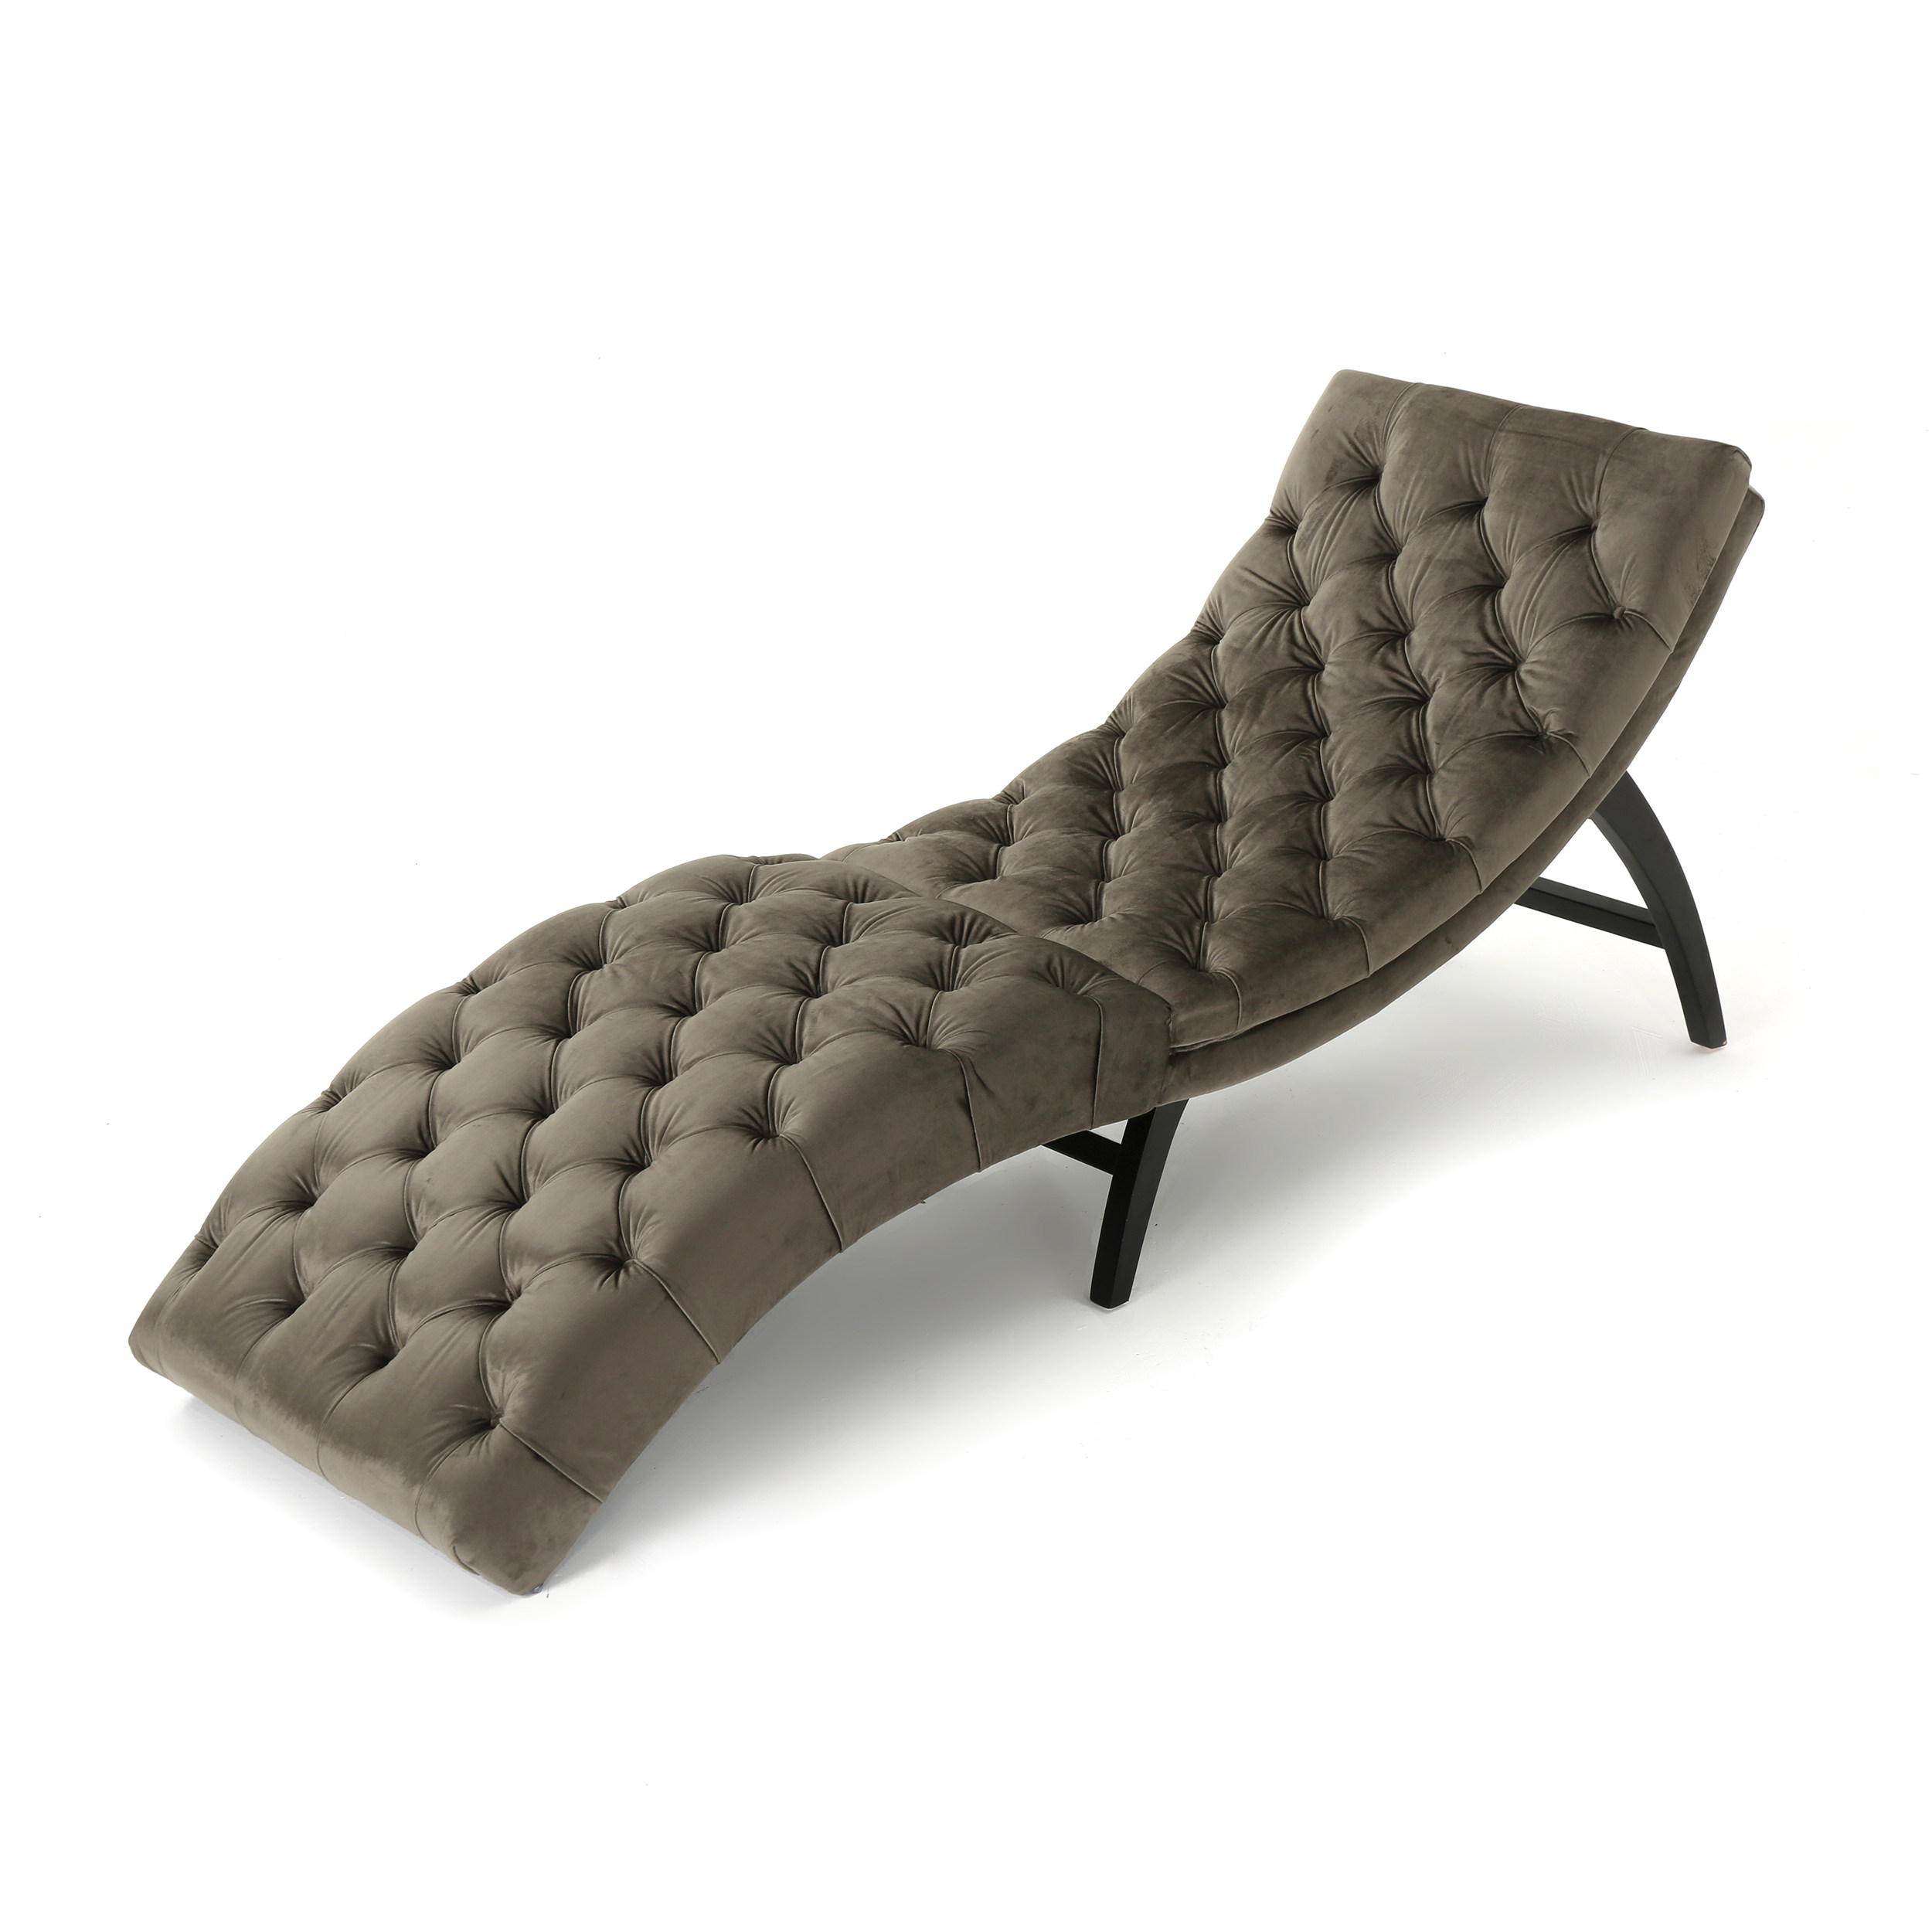 Garamond Traditional Indoor Tufted Velvet Chaise Lounge, Grey - image 3 of 9